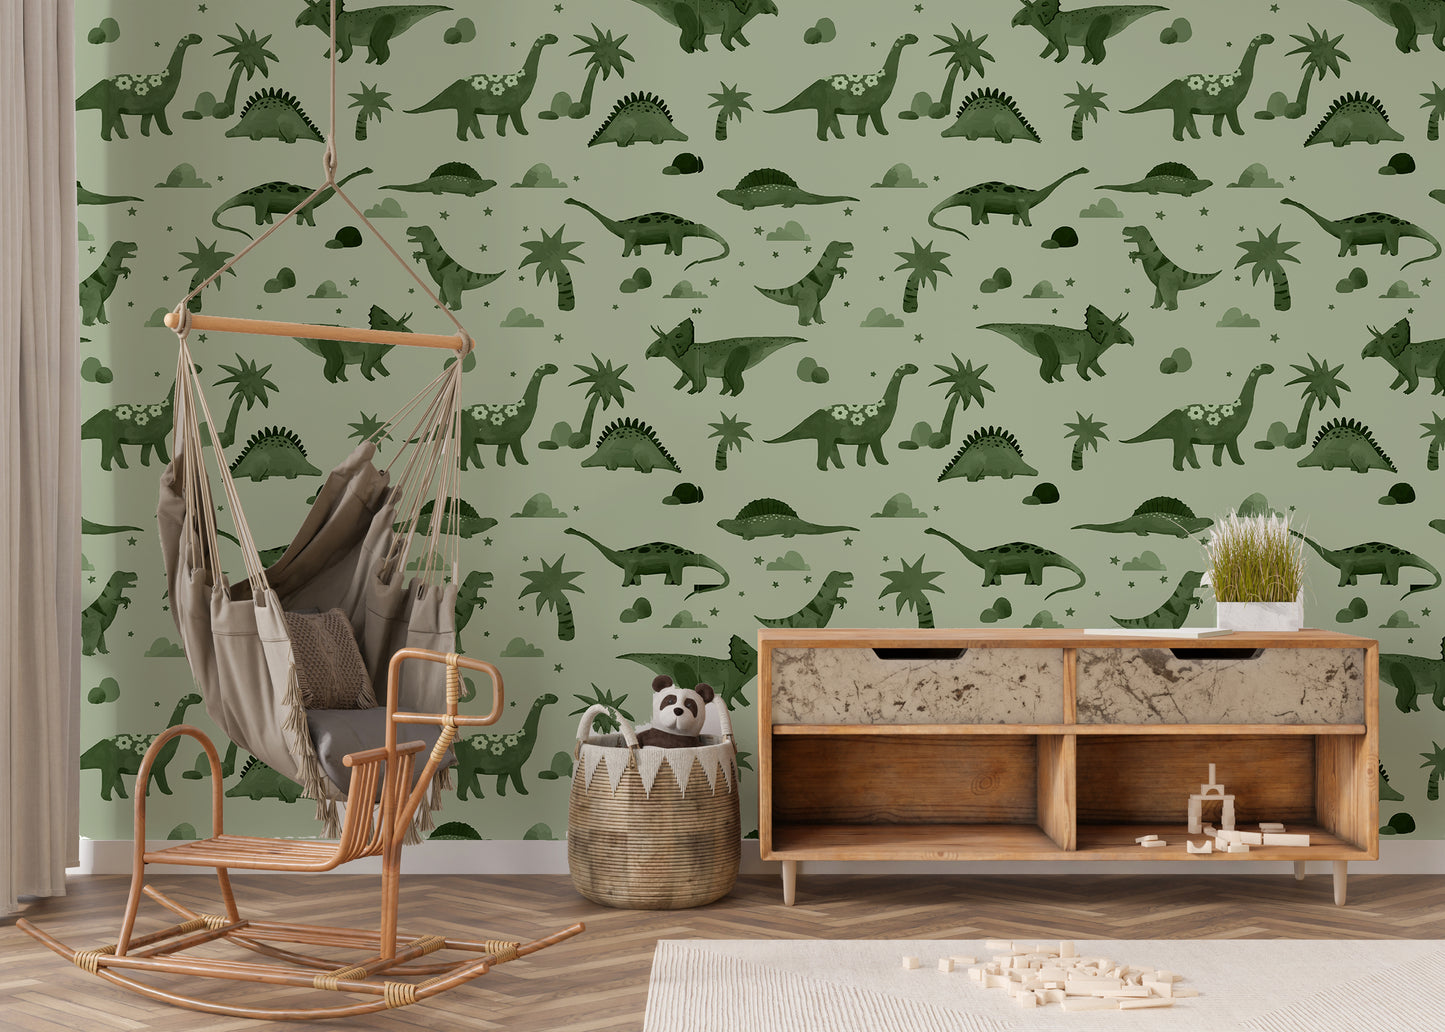 My Favorite Dinosaur Removable Peel And Stick Wallpaper